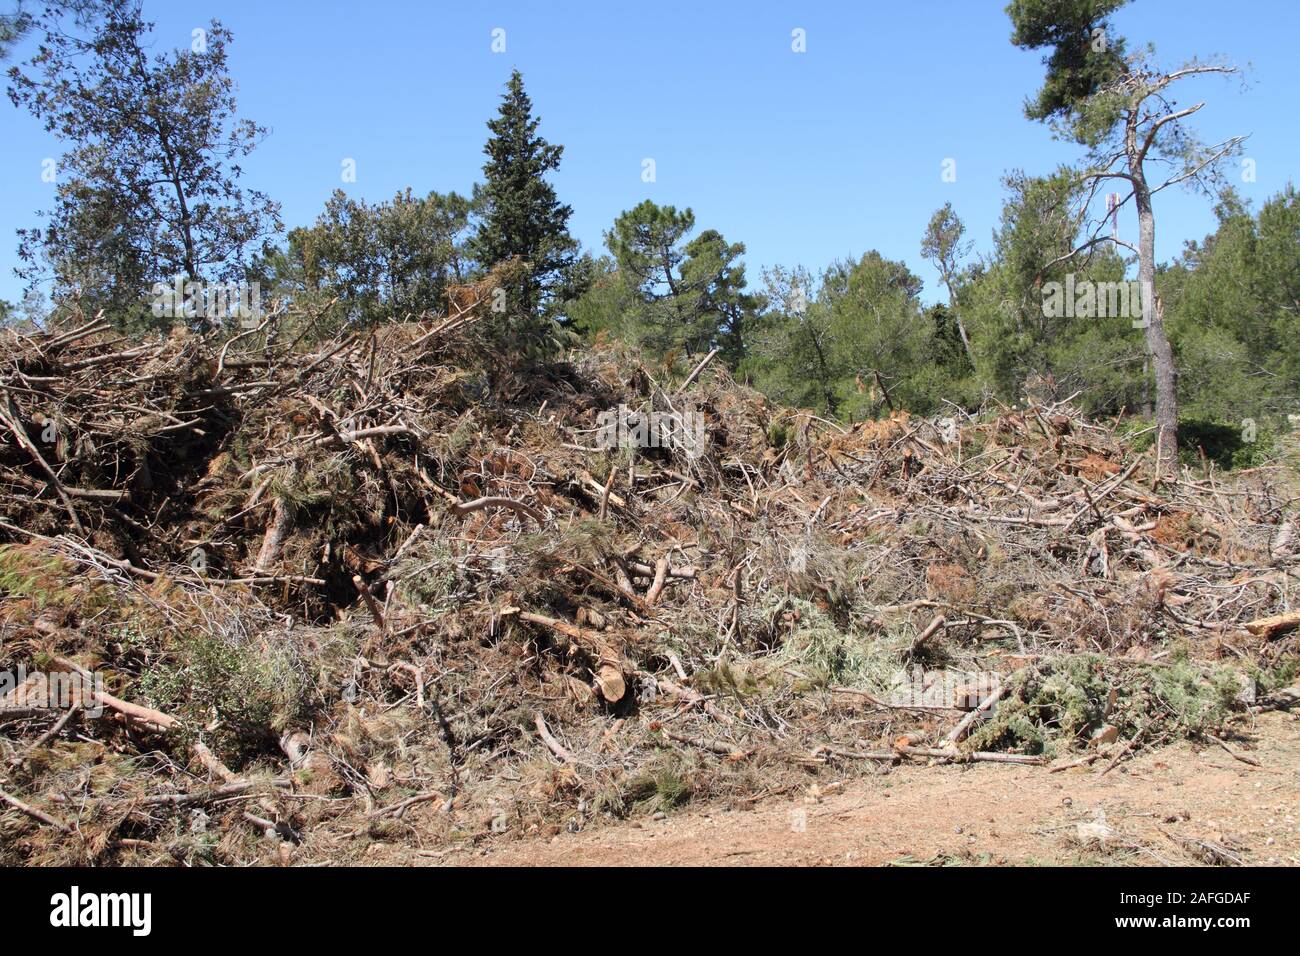 cleaning up after a storm damage in a pine forest Stock Photo